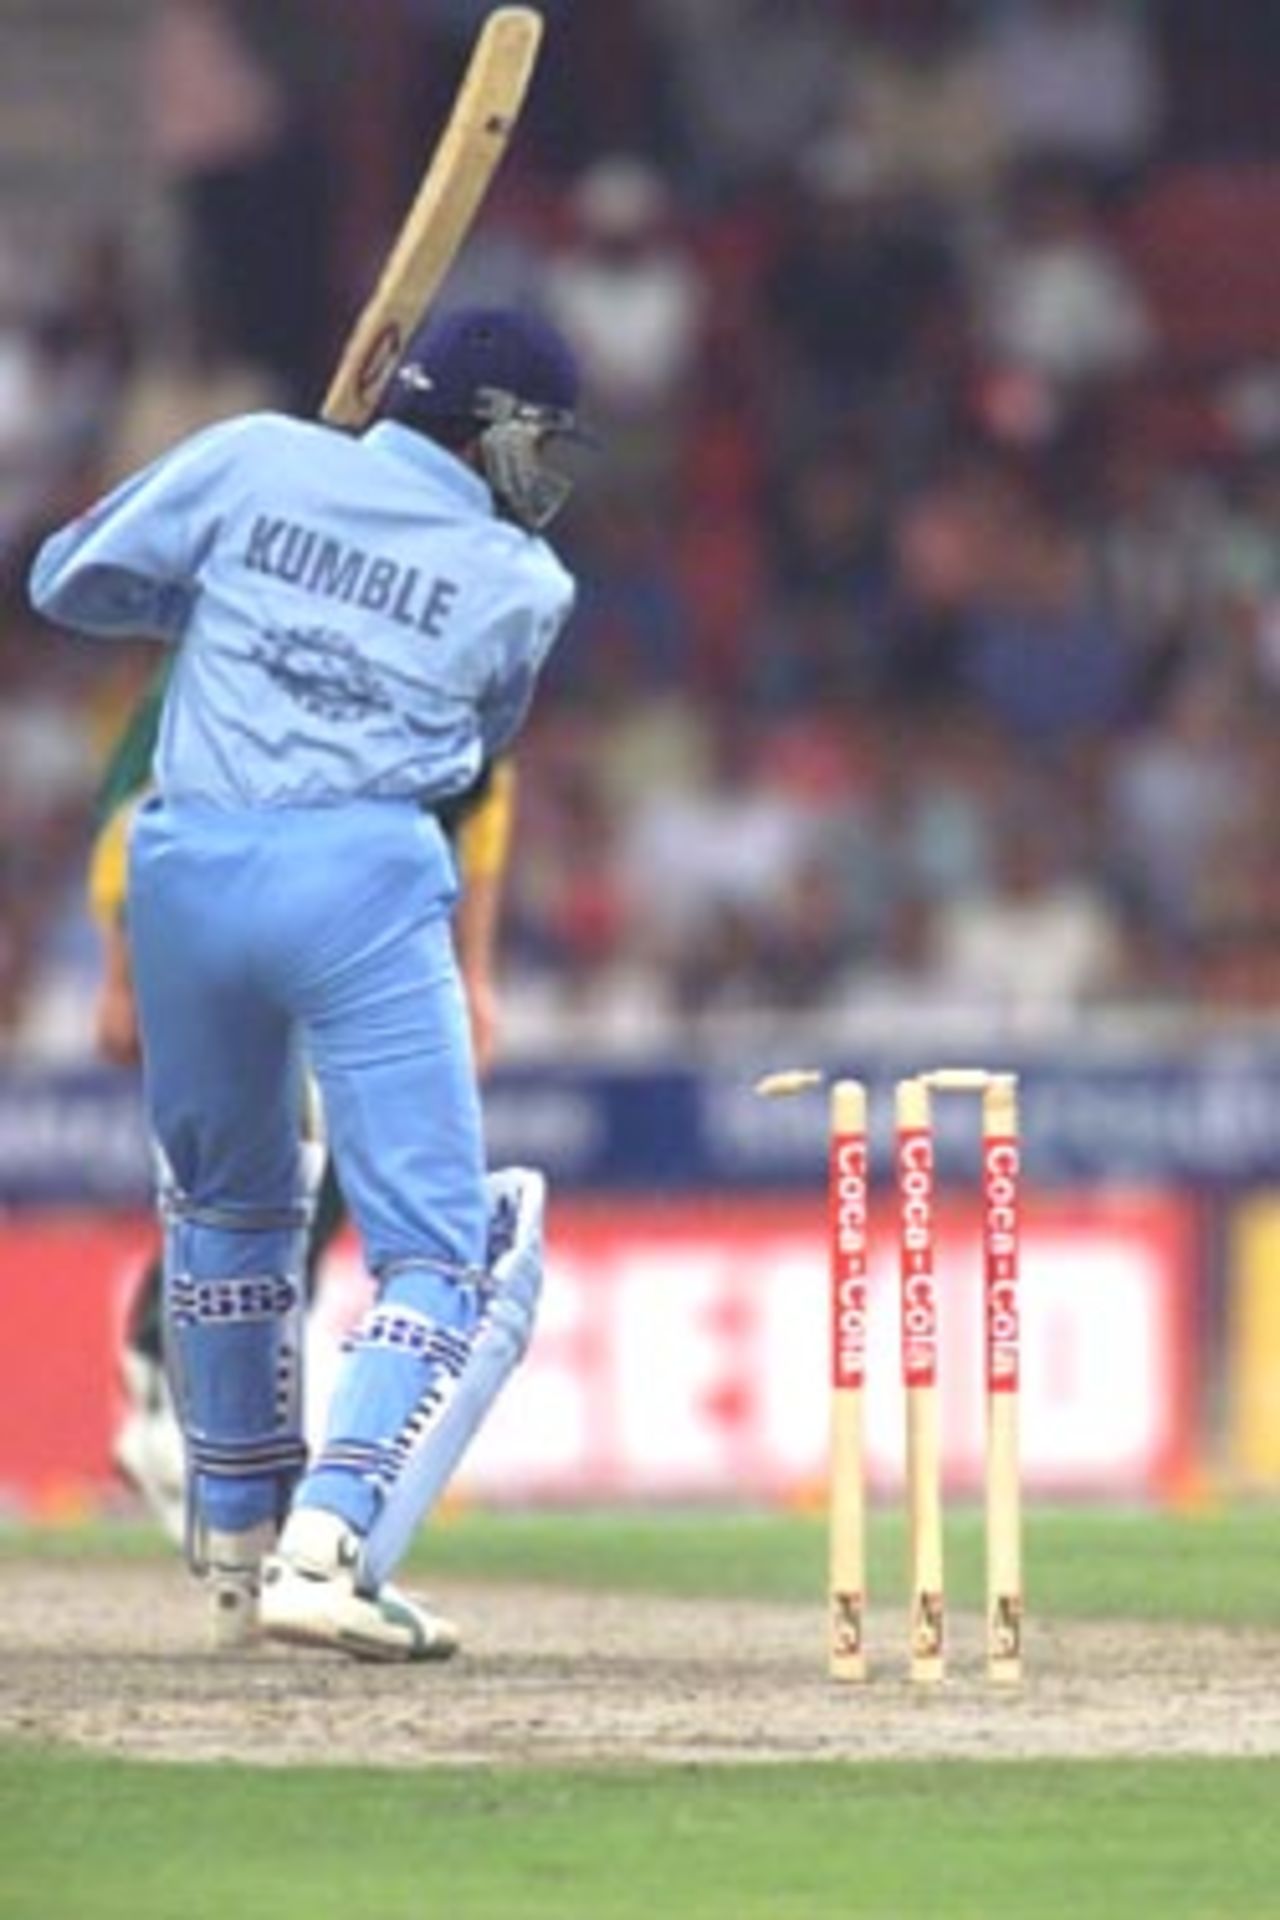 Anil Kumble cleaned bowled by Lance Klusener, India v South Africa, Coca-Cola Cup 1999/00, Sharjah C.A. Stadium, 27 March 2000